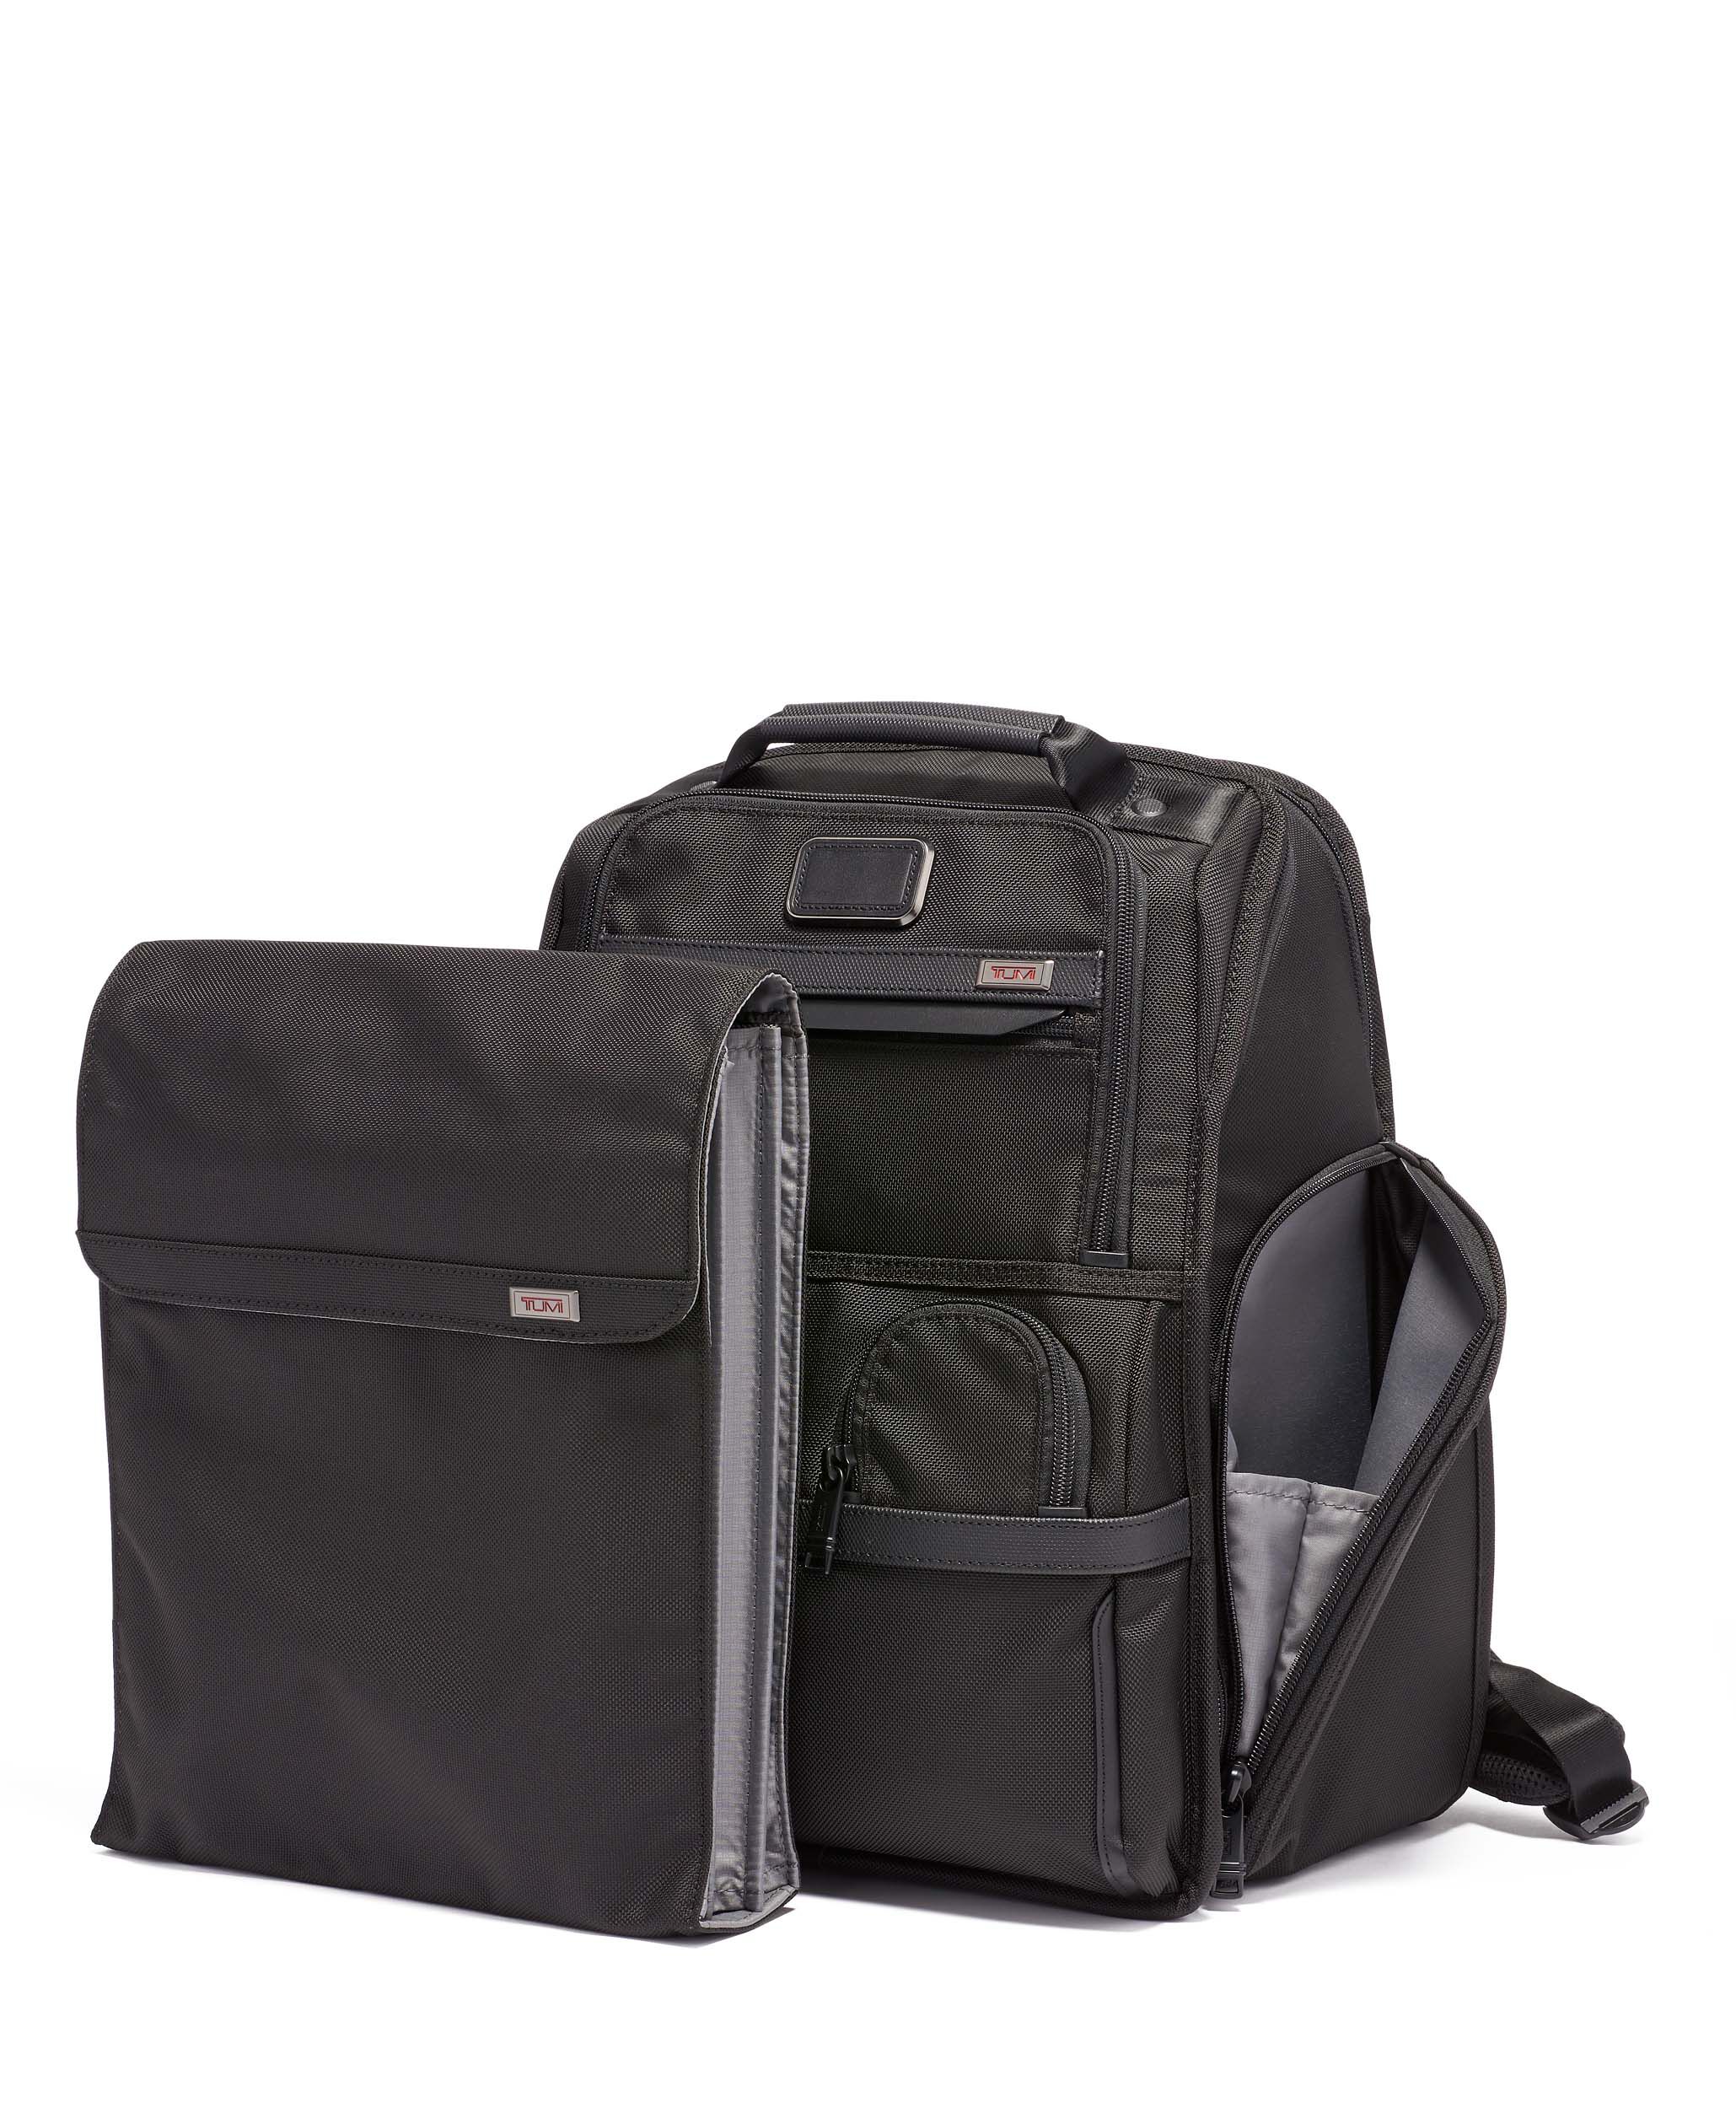 Alpha 3 Compact Laptop Brief Pack | TUMI Spain